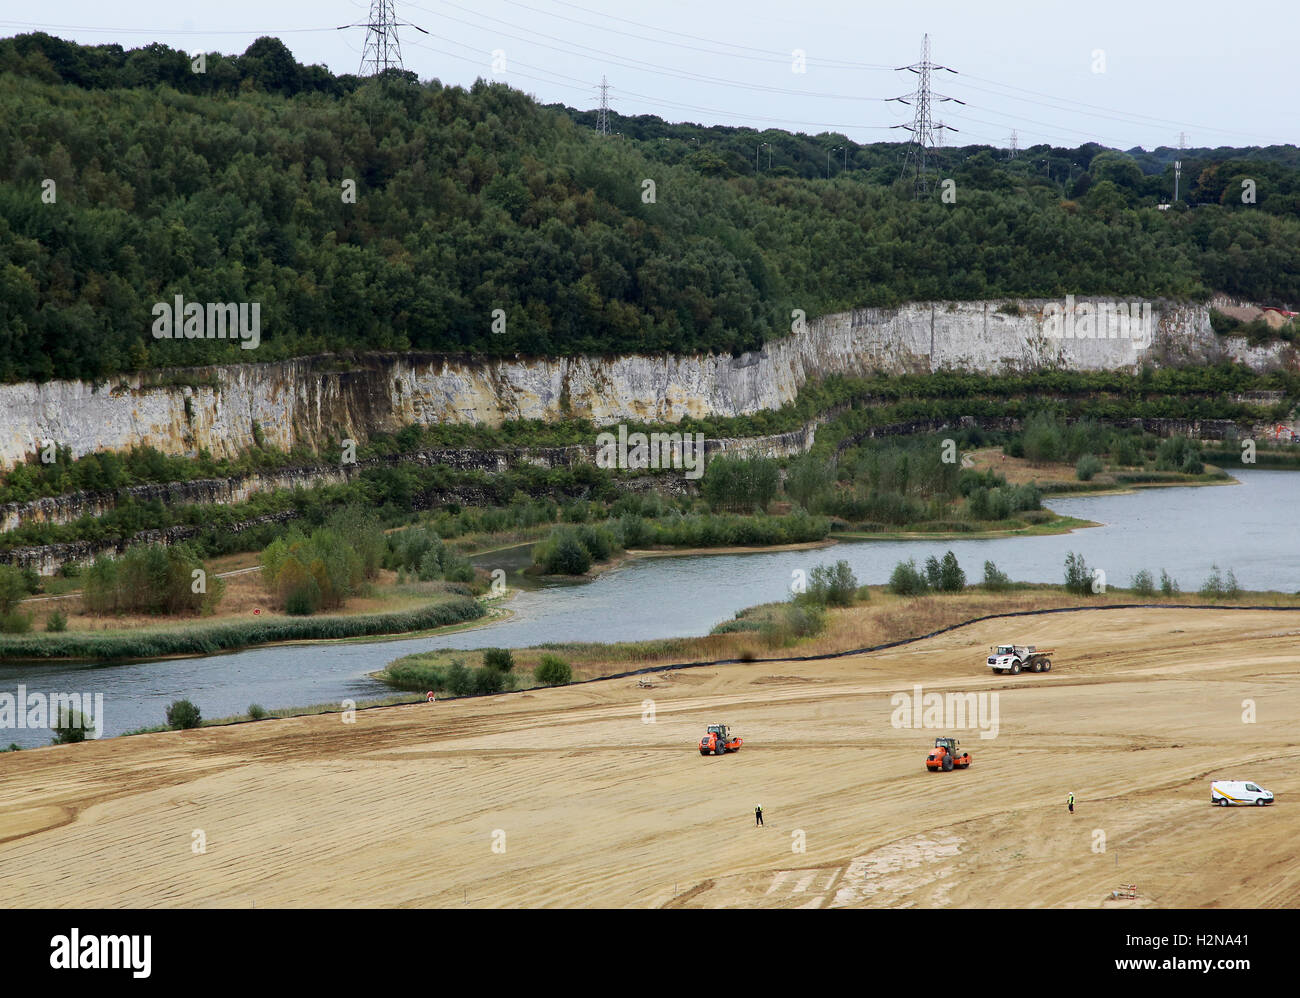 A general view of the construction sites in Ebbsfleet, Kent, where developers are building a new garden city on the Thames Estuary, to help deal with Britain's housing shortage. Stock Photo